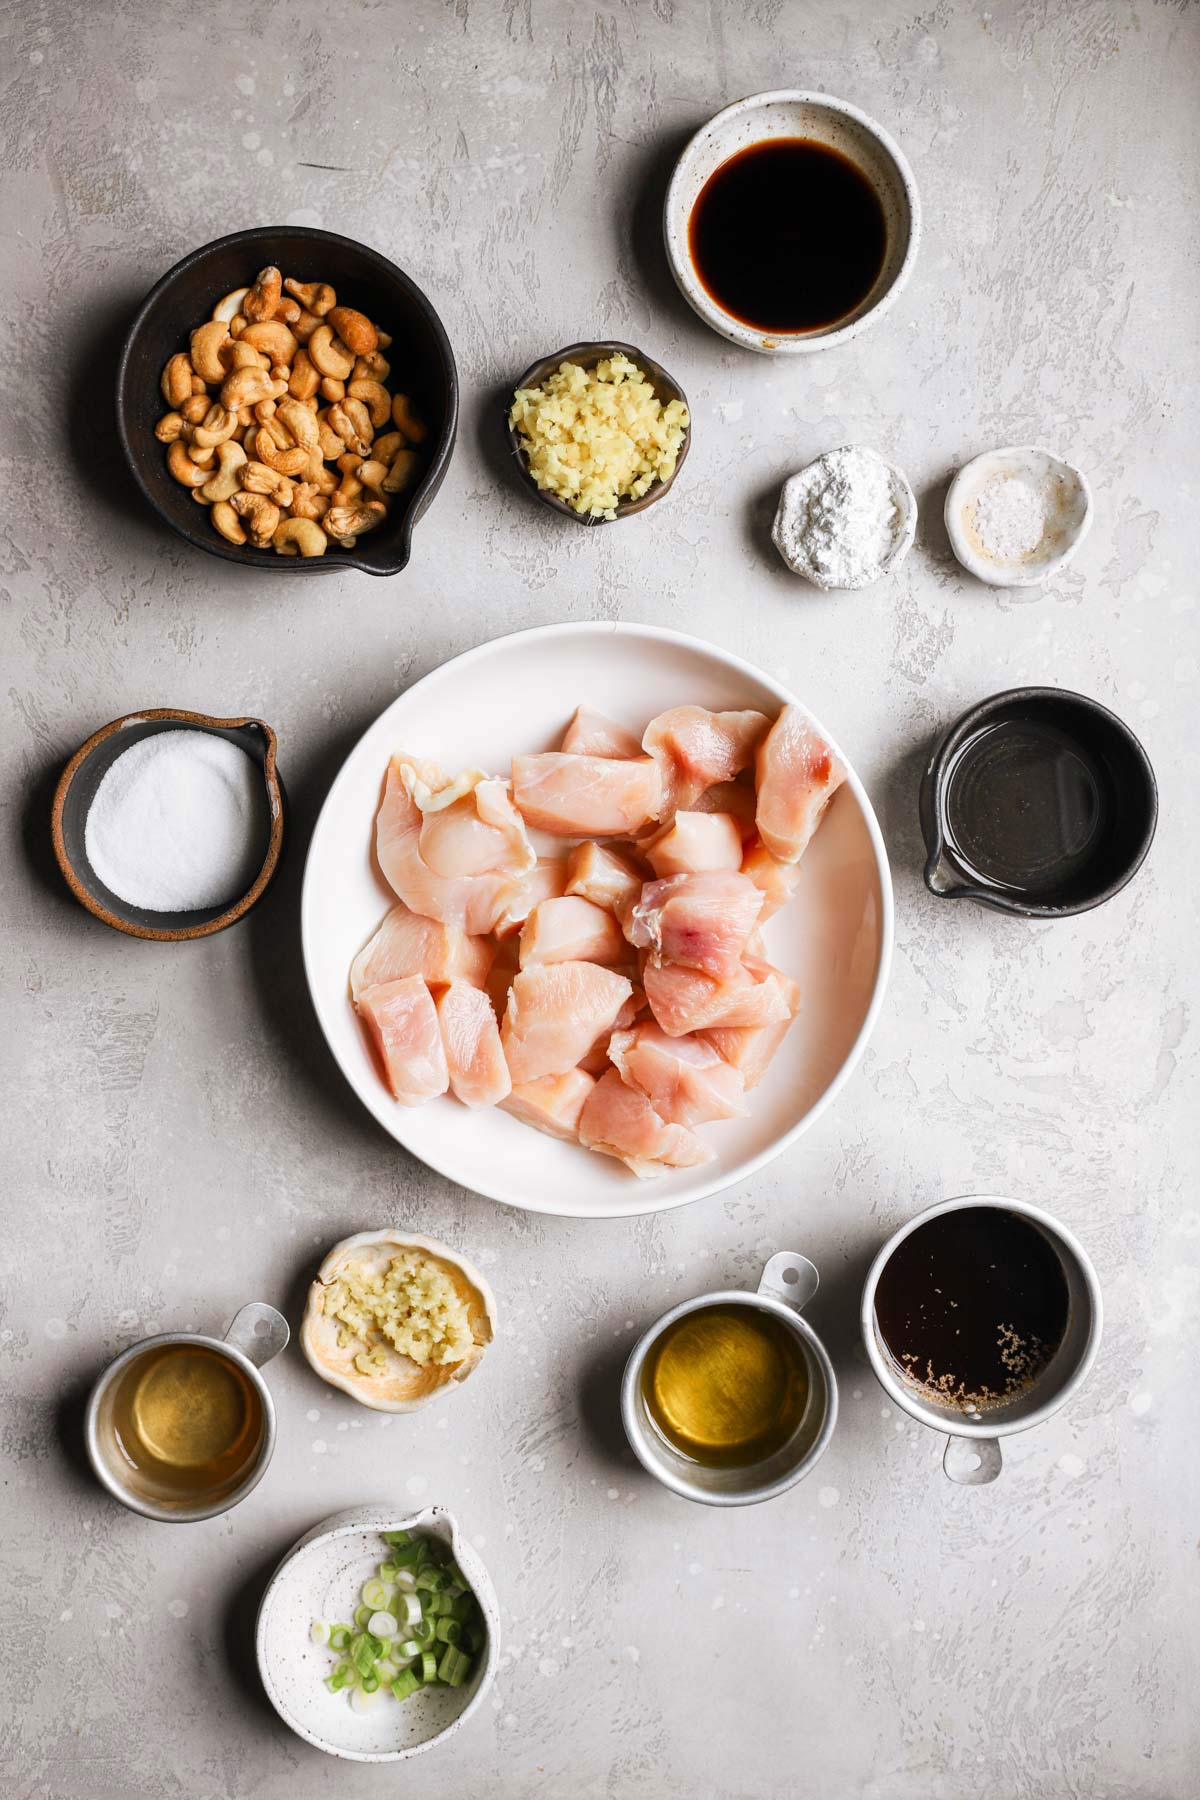 Ingredients for chicken with cashew nuts prepped on a counter.